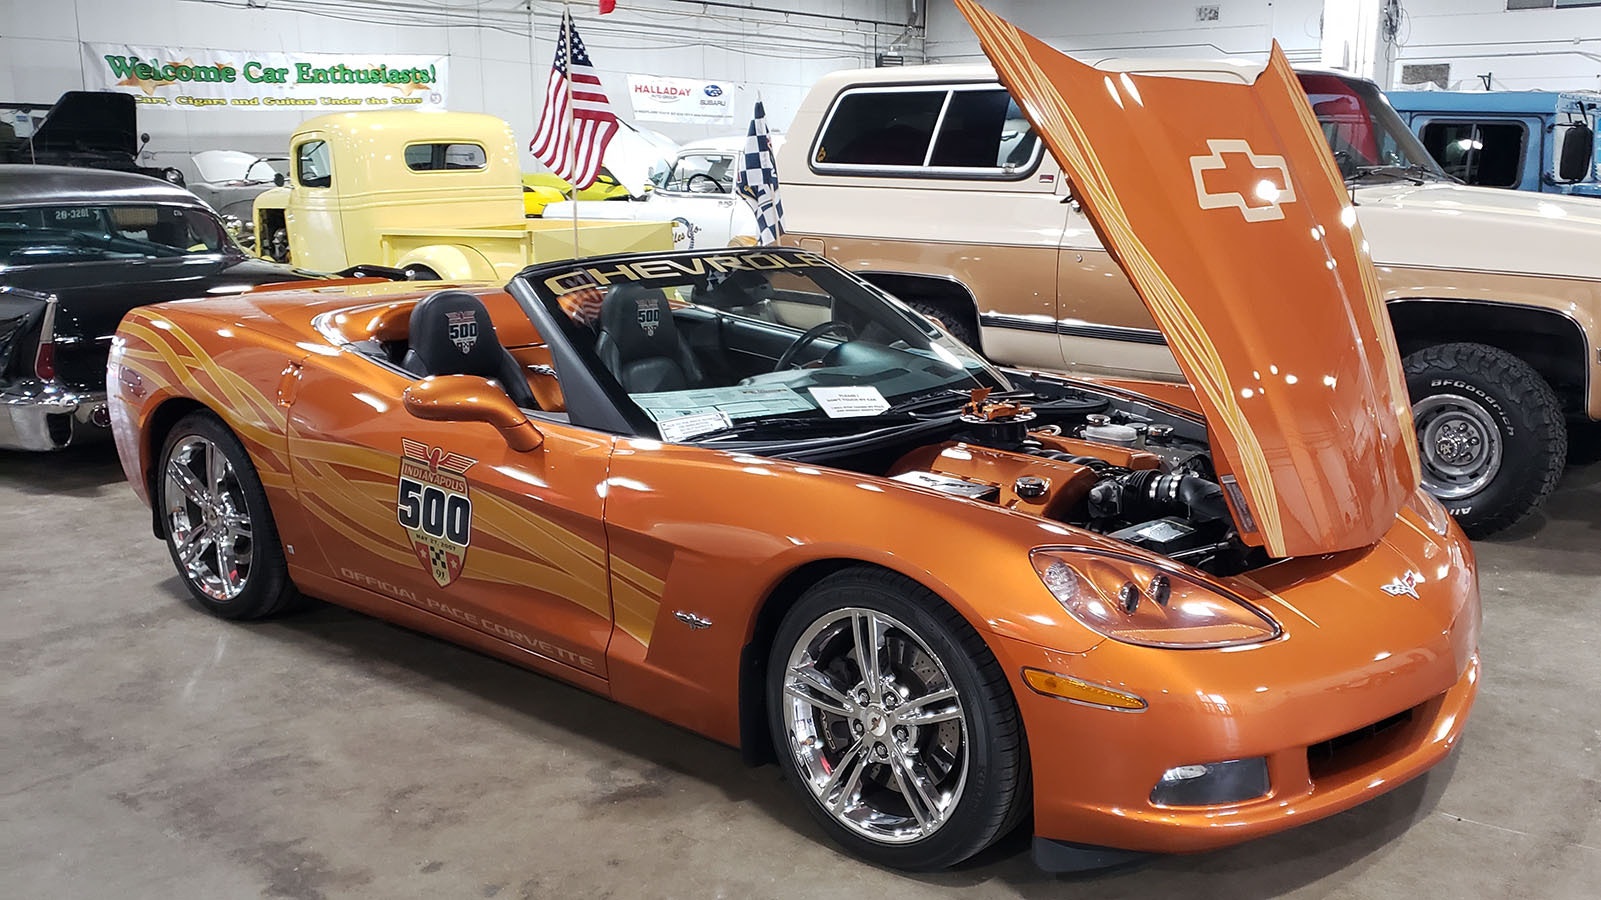 A 2007 Chevrolet Corvette Indy 500 owned by Steve Melius.